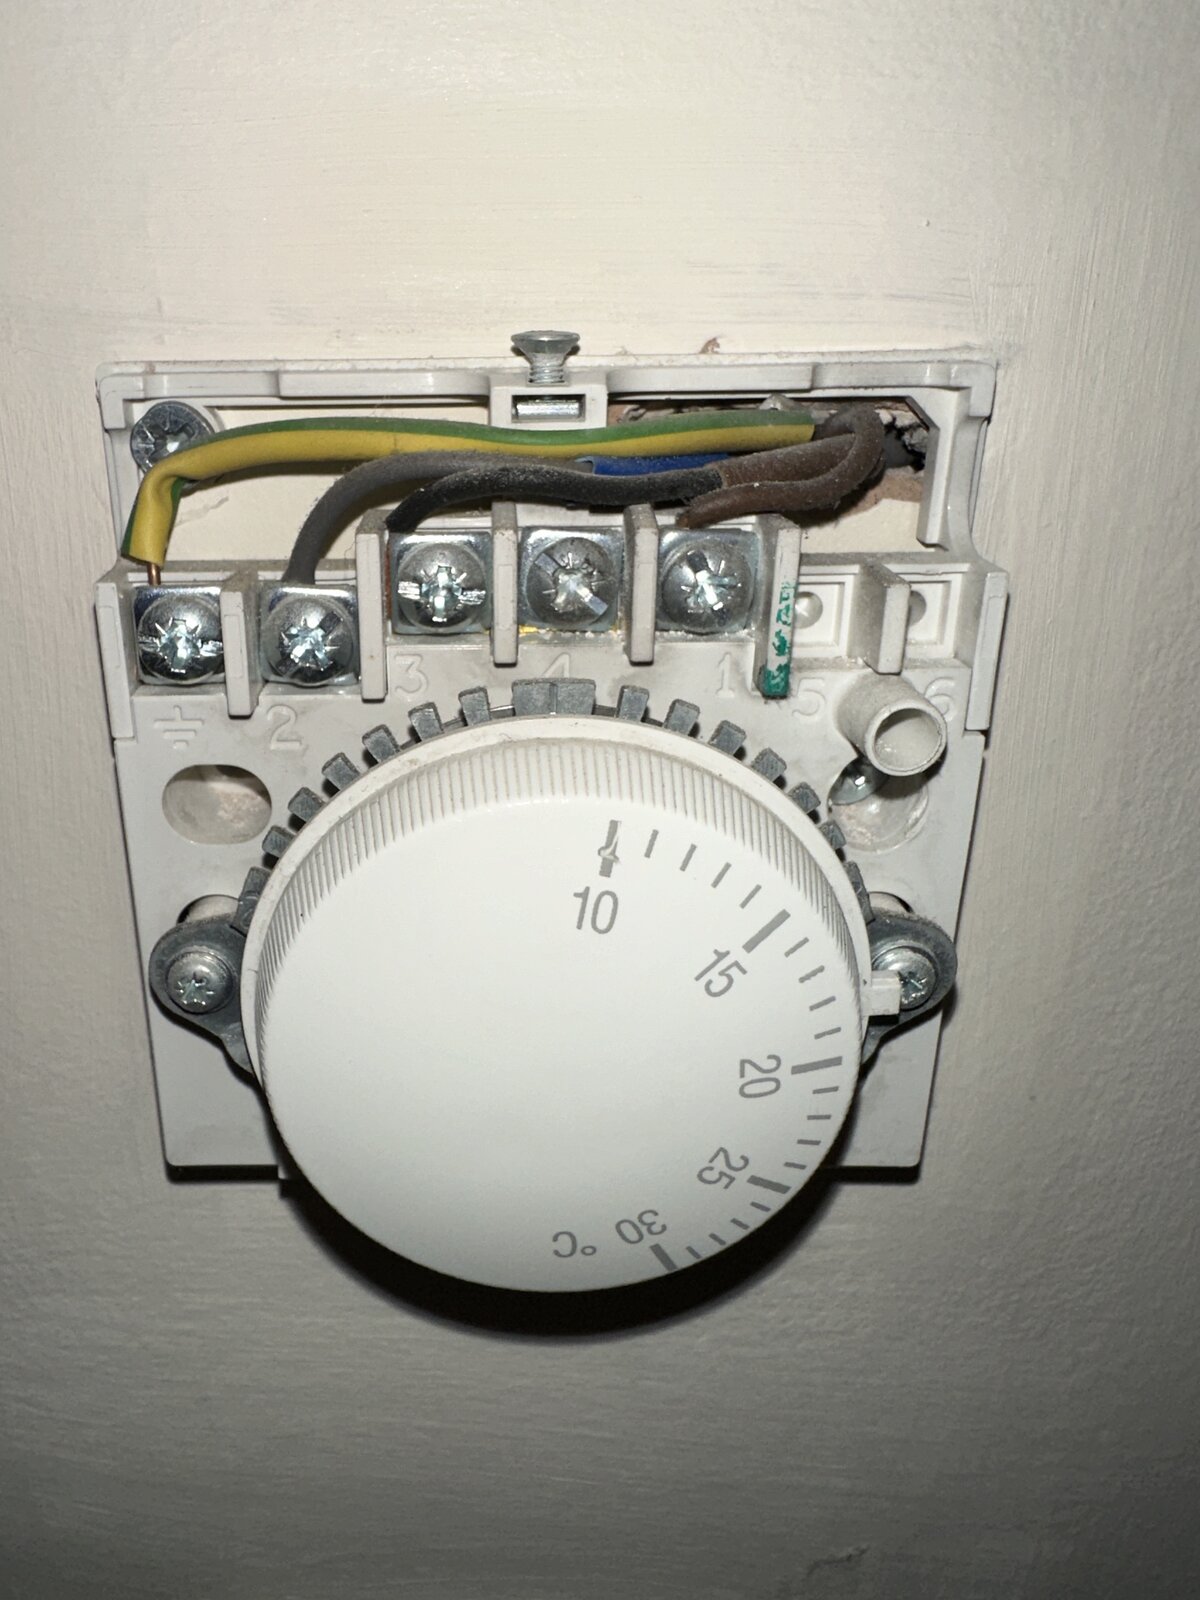 An image of the original Honeywell thermostat, with the wiring exposed.